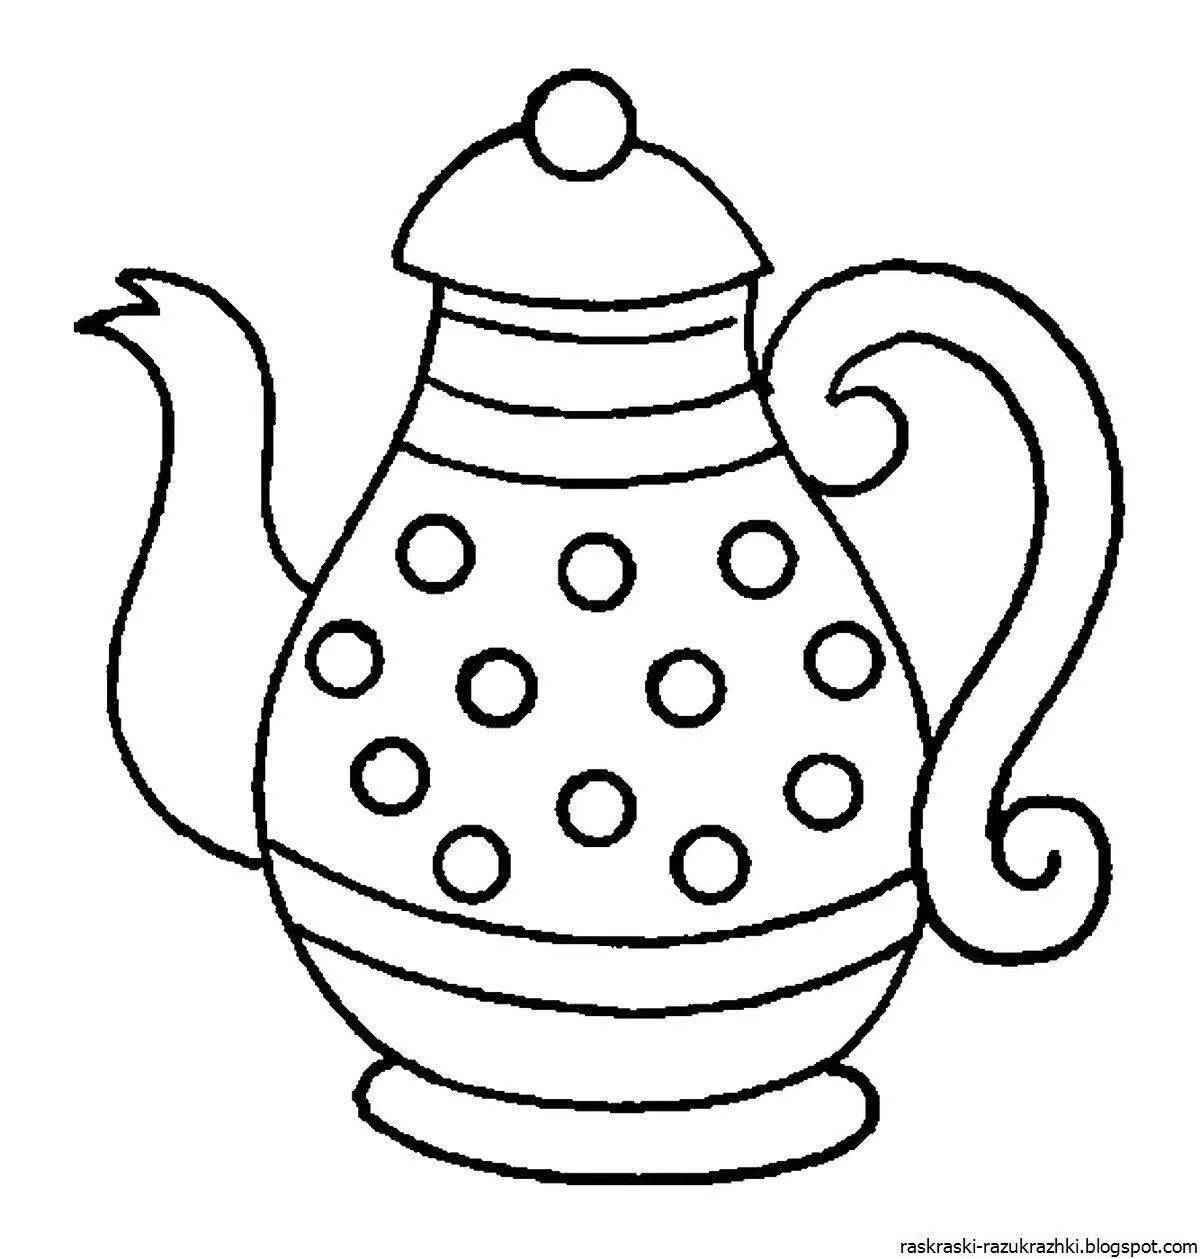 Teapot for children 4 5 years old #2